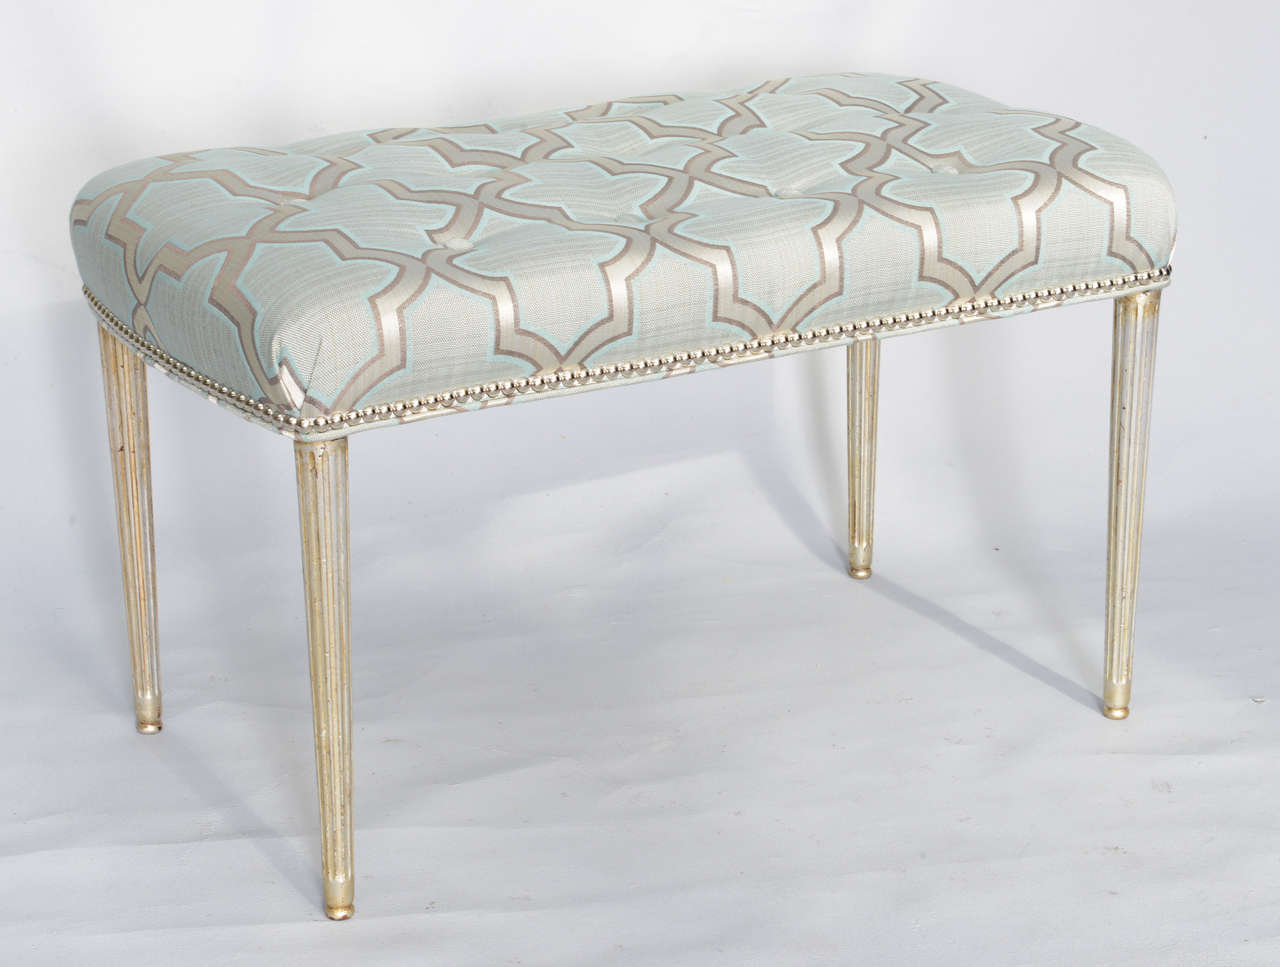 20th Century French Upholstered Bench on Silvergilt Legs Circa 1920s